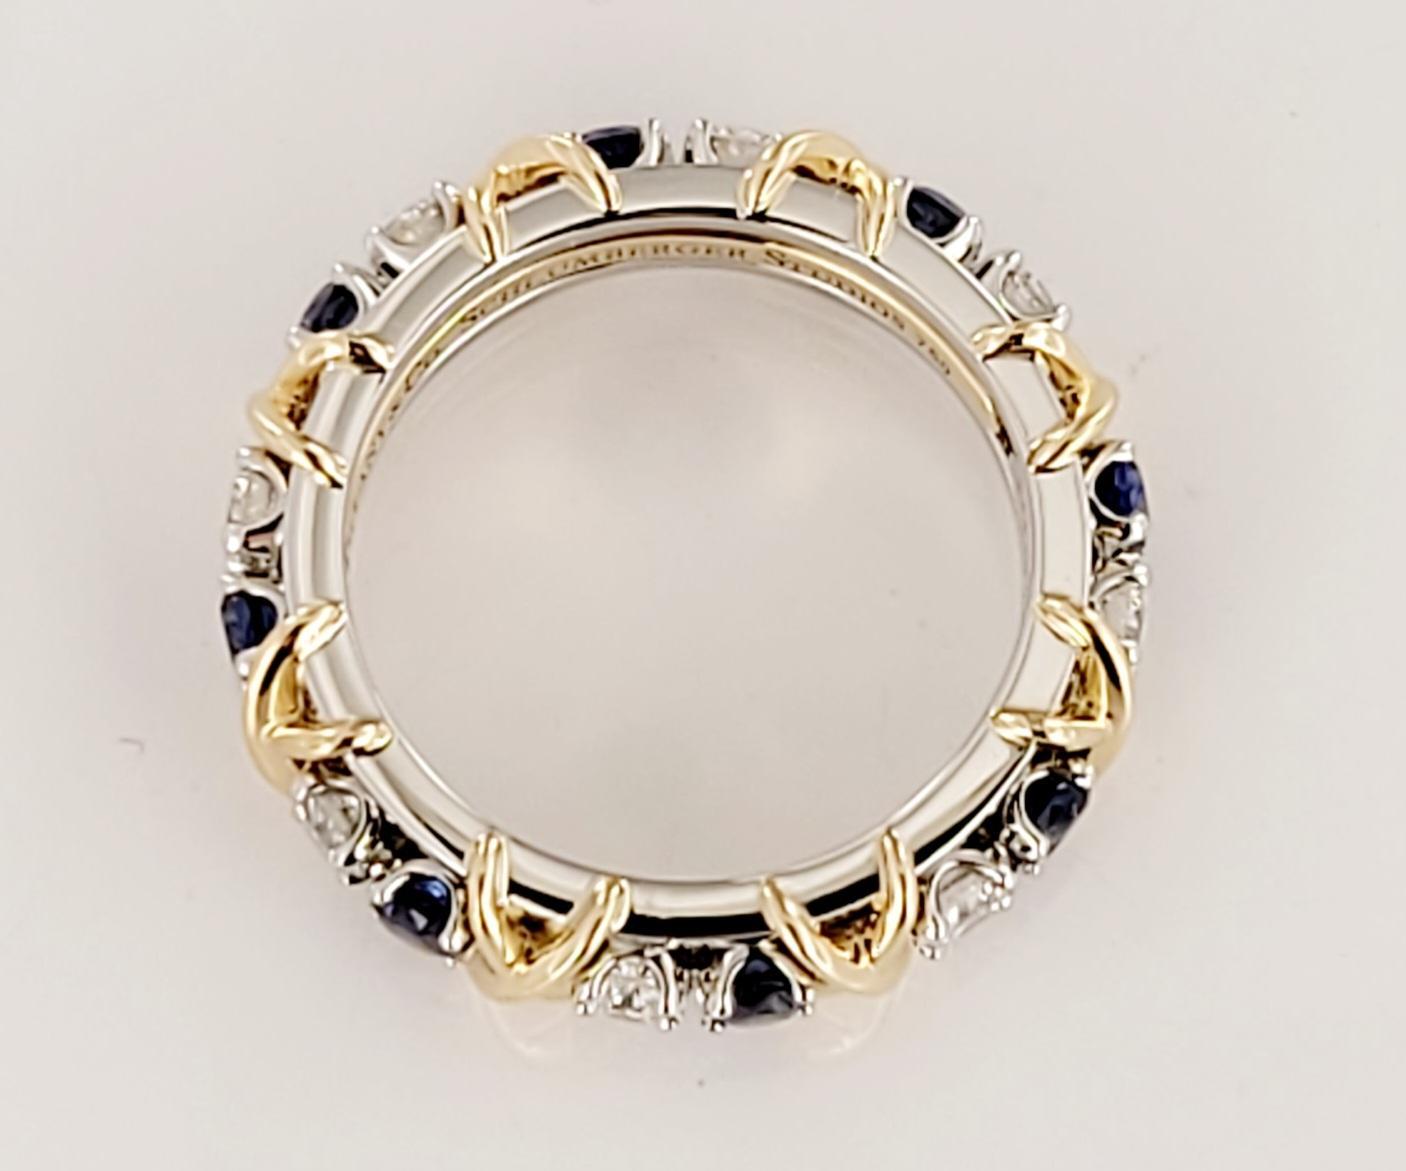 Brand Tiffany & Co
Sixteen Stone Ring
18K Yellow Gold & PT950
Ring Size 6
Main stone Sapphire 
Diamond .59cts
Sapphire .75cts
Diamond Clarity VS
Color Grade F-G
Weight 8.1gr
Retail Price $13.500
Comes with Tiffany & co ring box